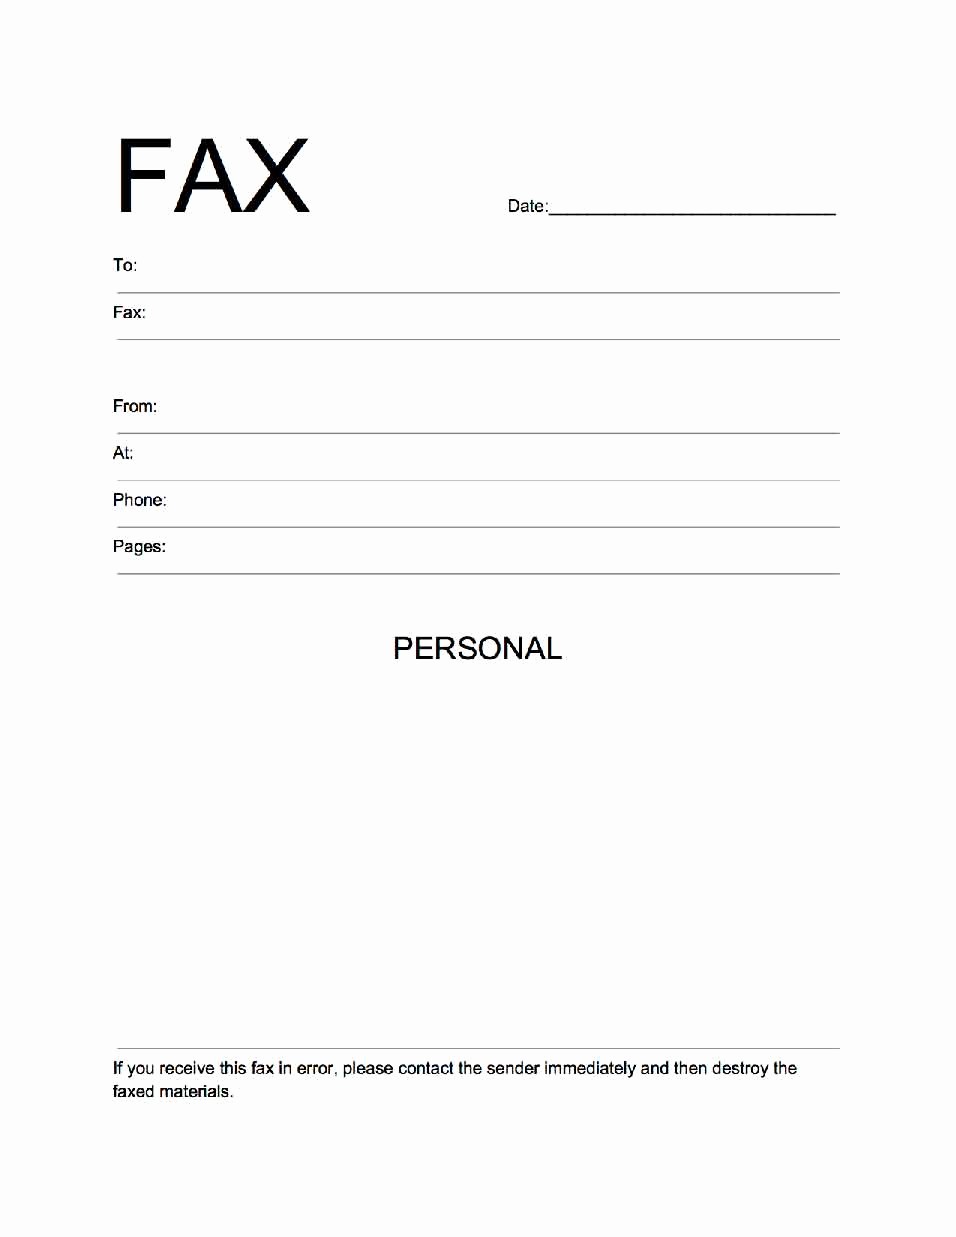 Print A Fax Cover Sheet Luxury Printable Standard Fax Cover Sheet Printable Pages